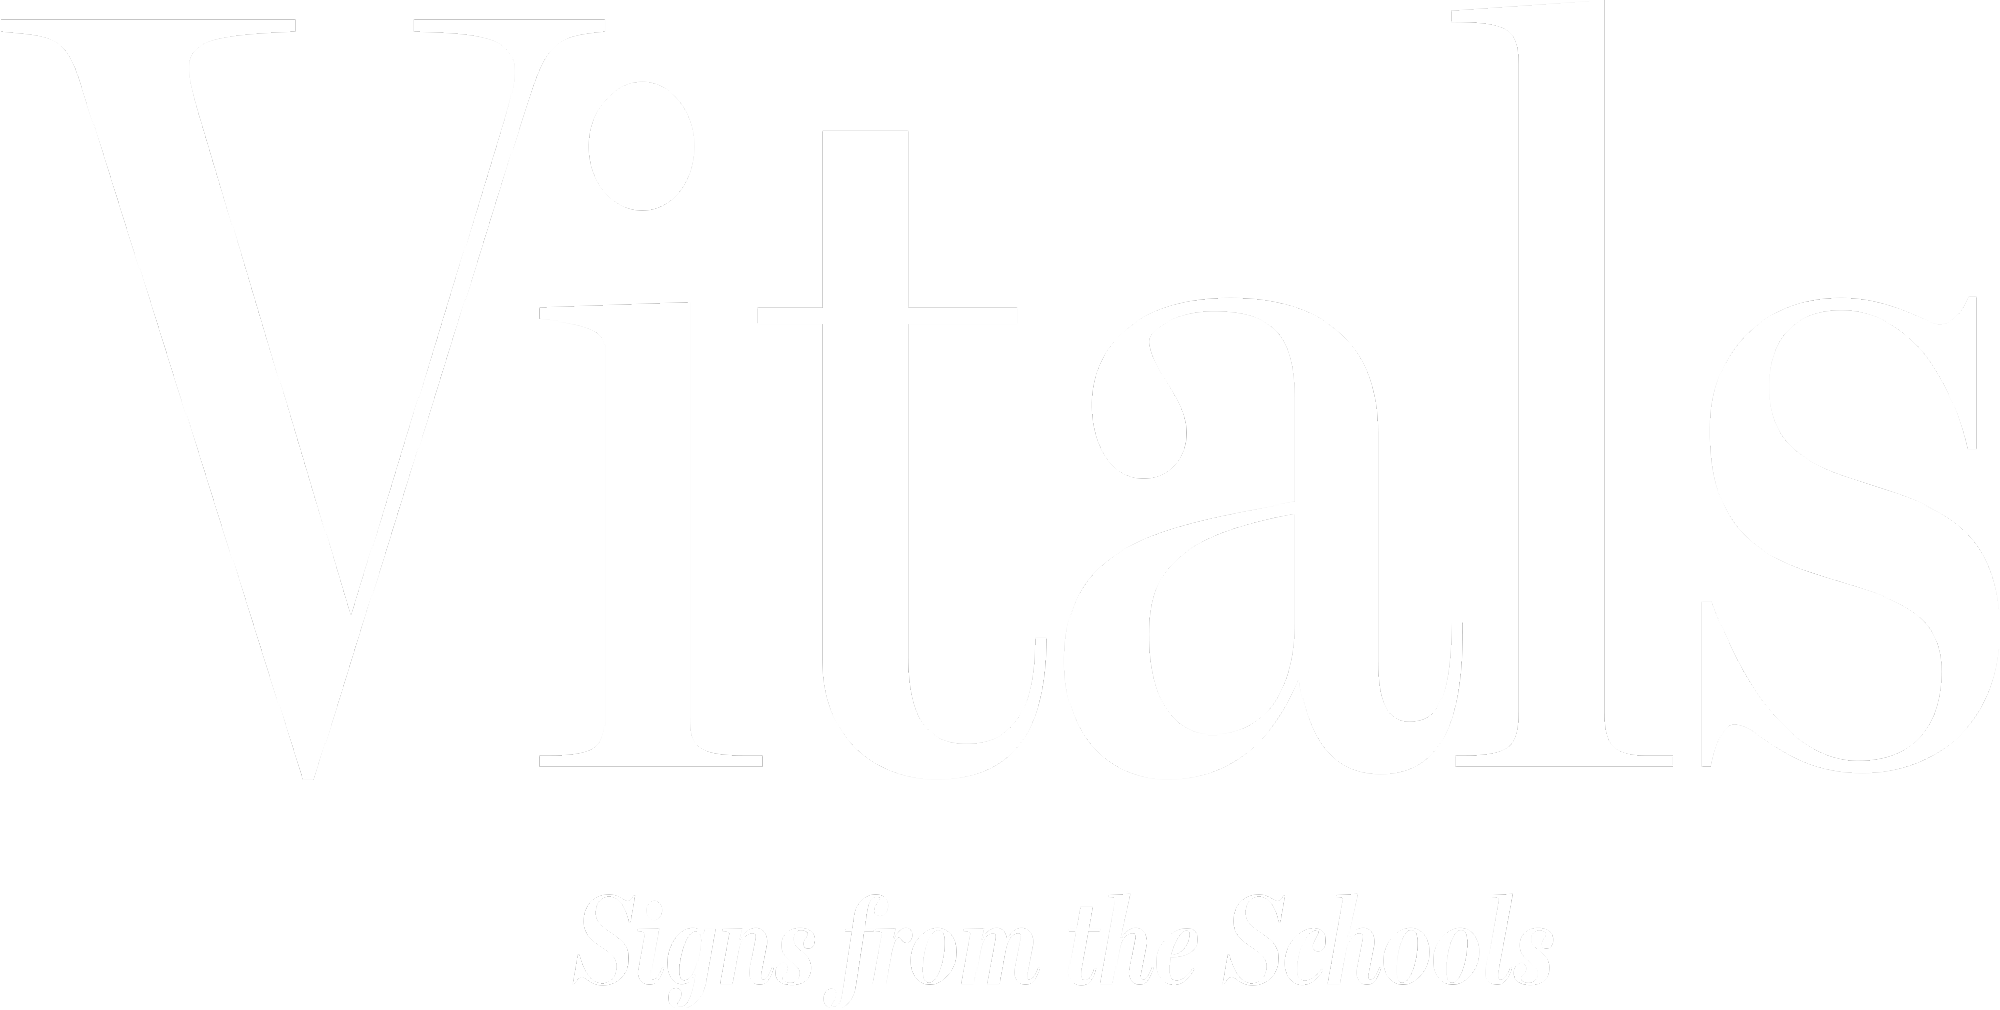 Vitals Signs from the Schools